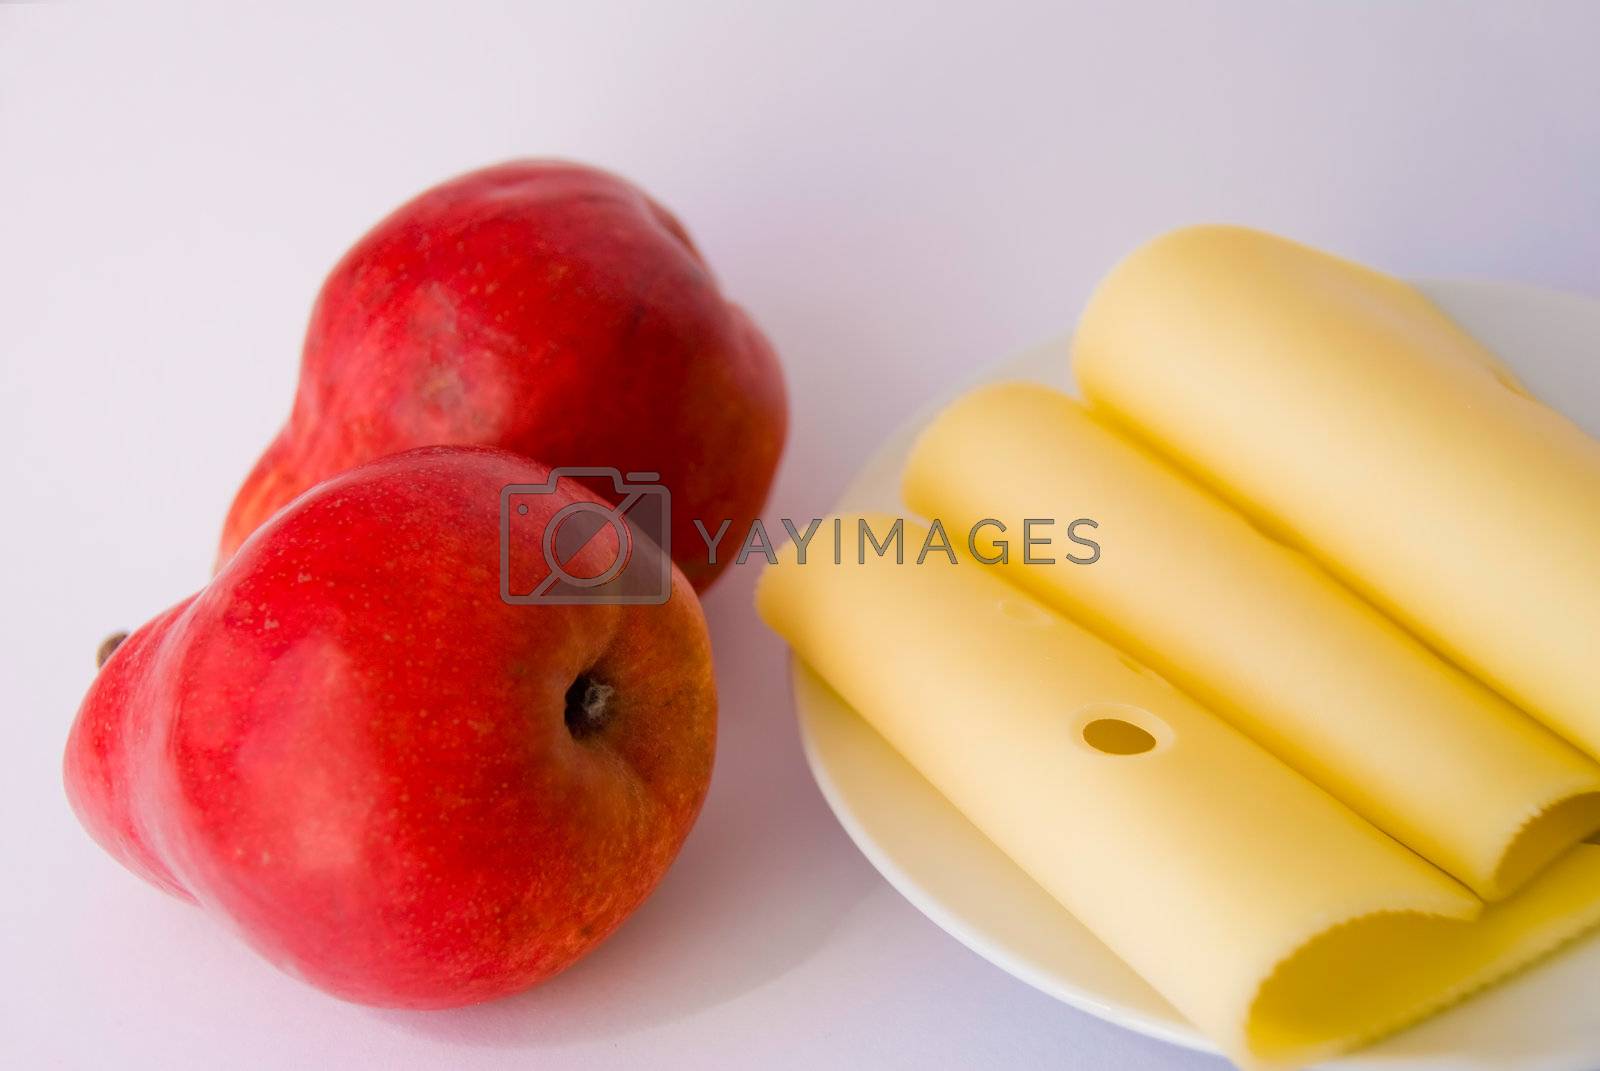 Royalty free image of Pears and Cheese by Klim